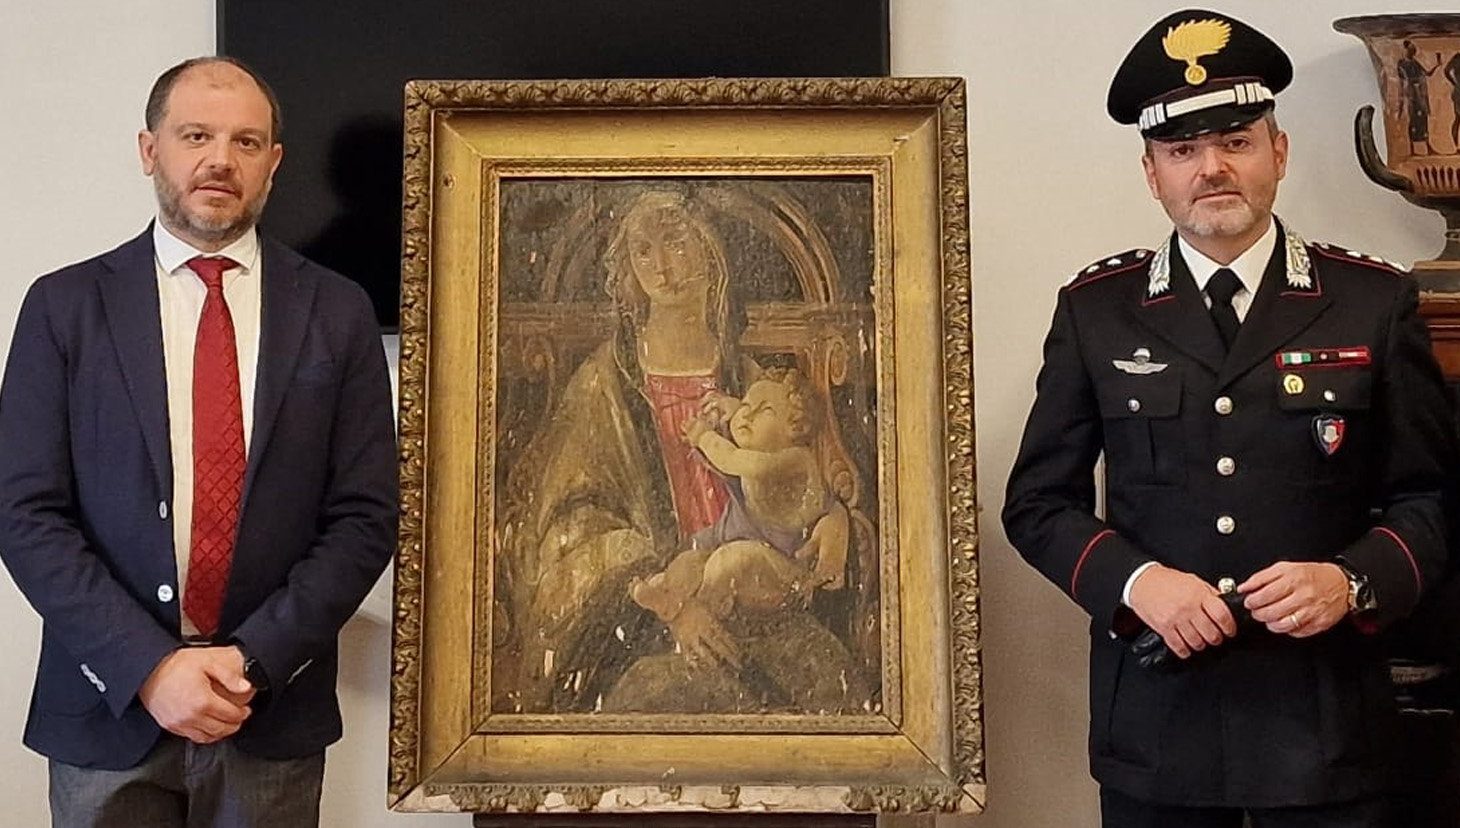 painting worth £85 million seized after family 'kept it hidden from traffickers'